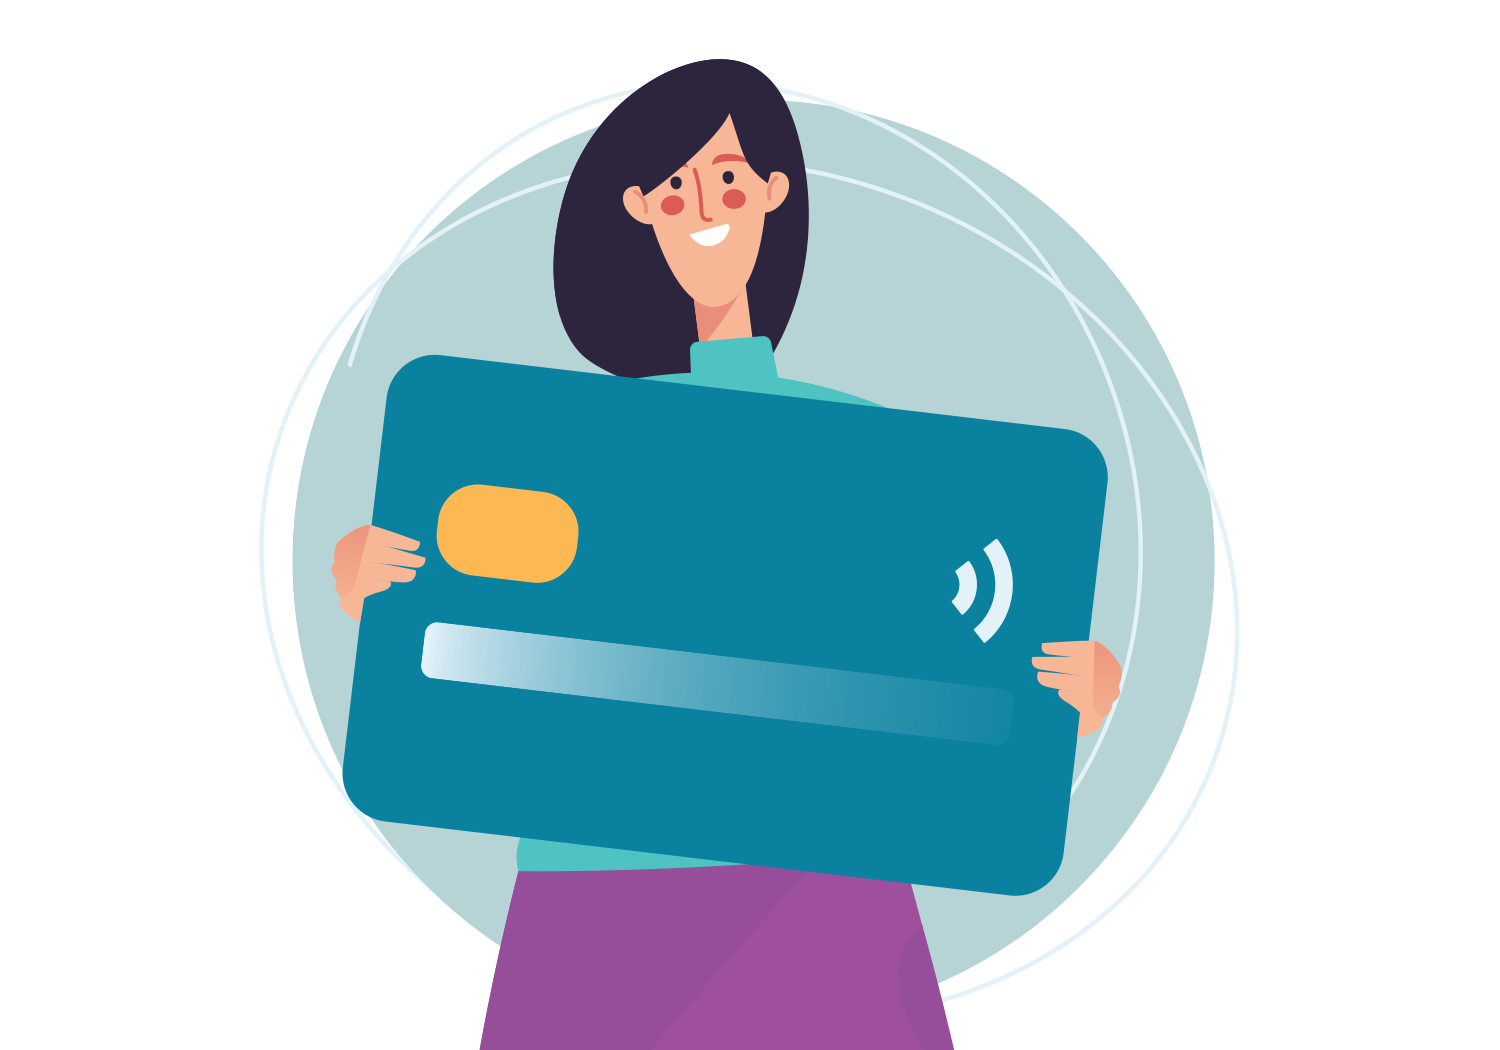 Vector illustration depicting a woman holding a debit card